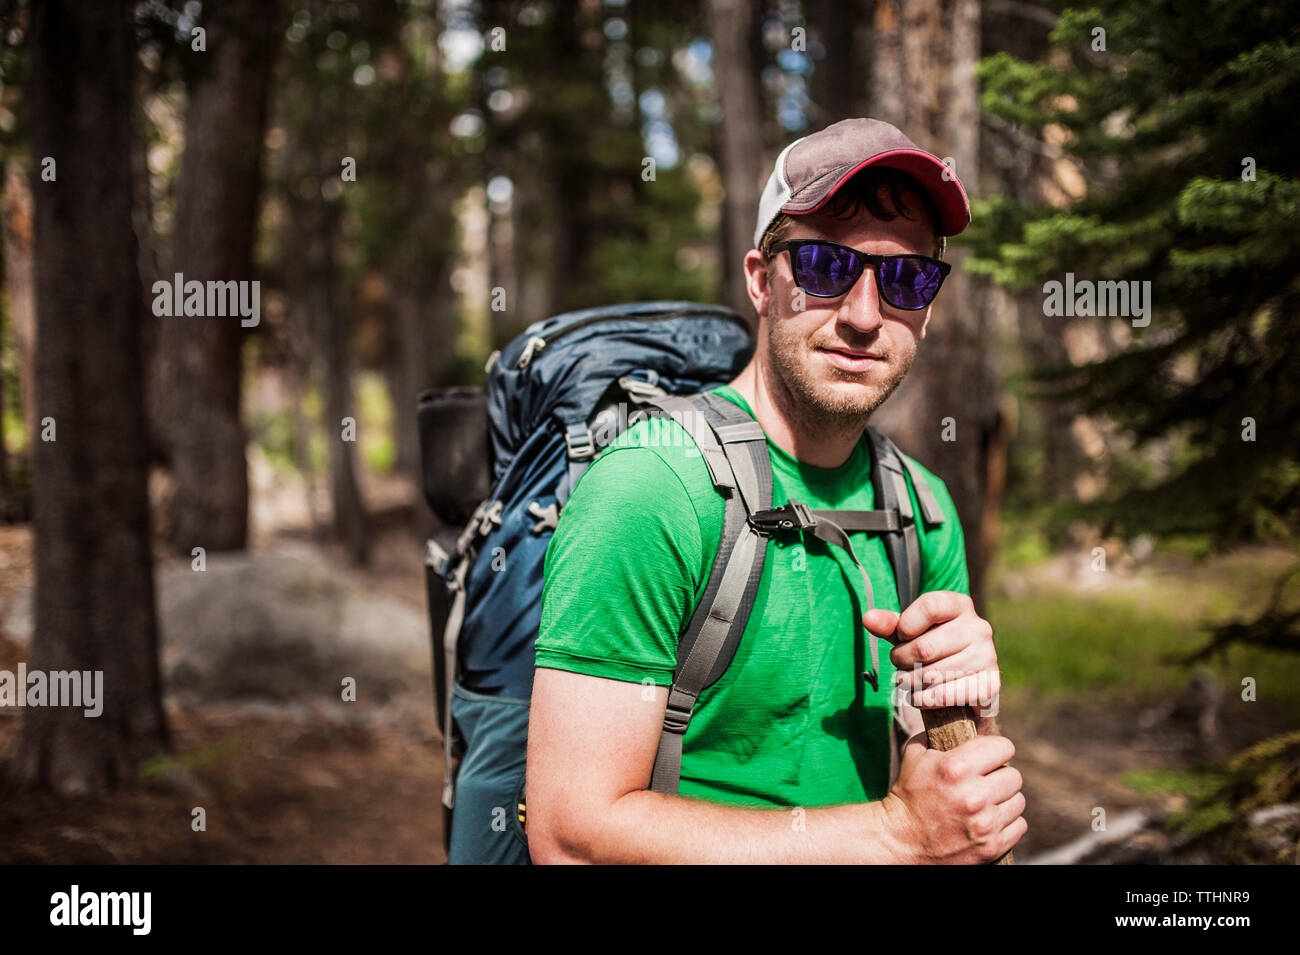 Close-up of man with backpack in forest Banque D'Images